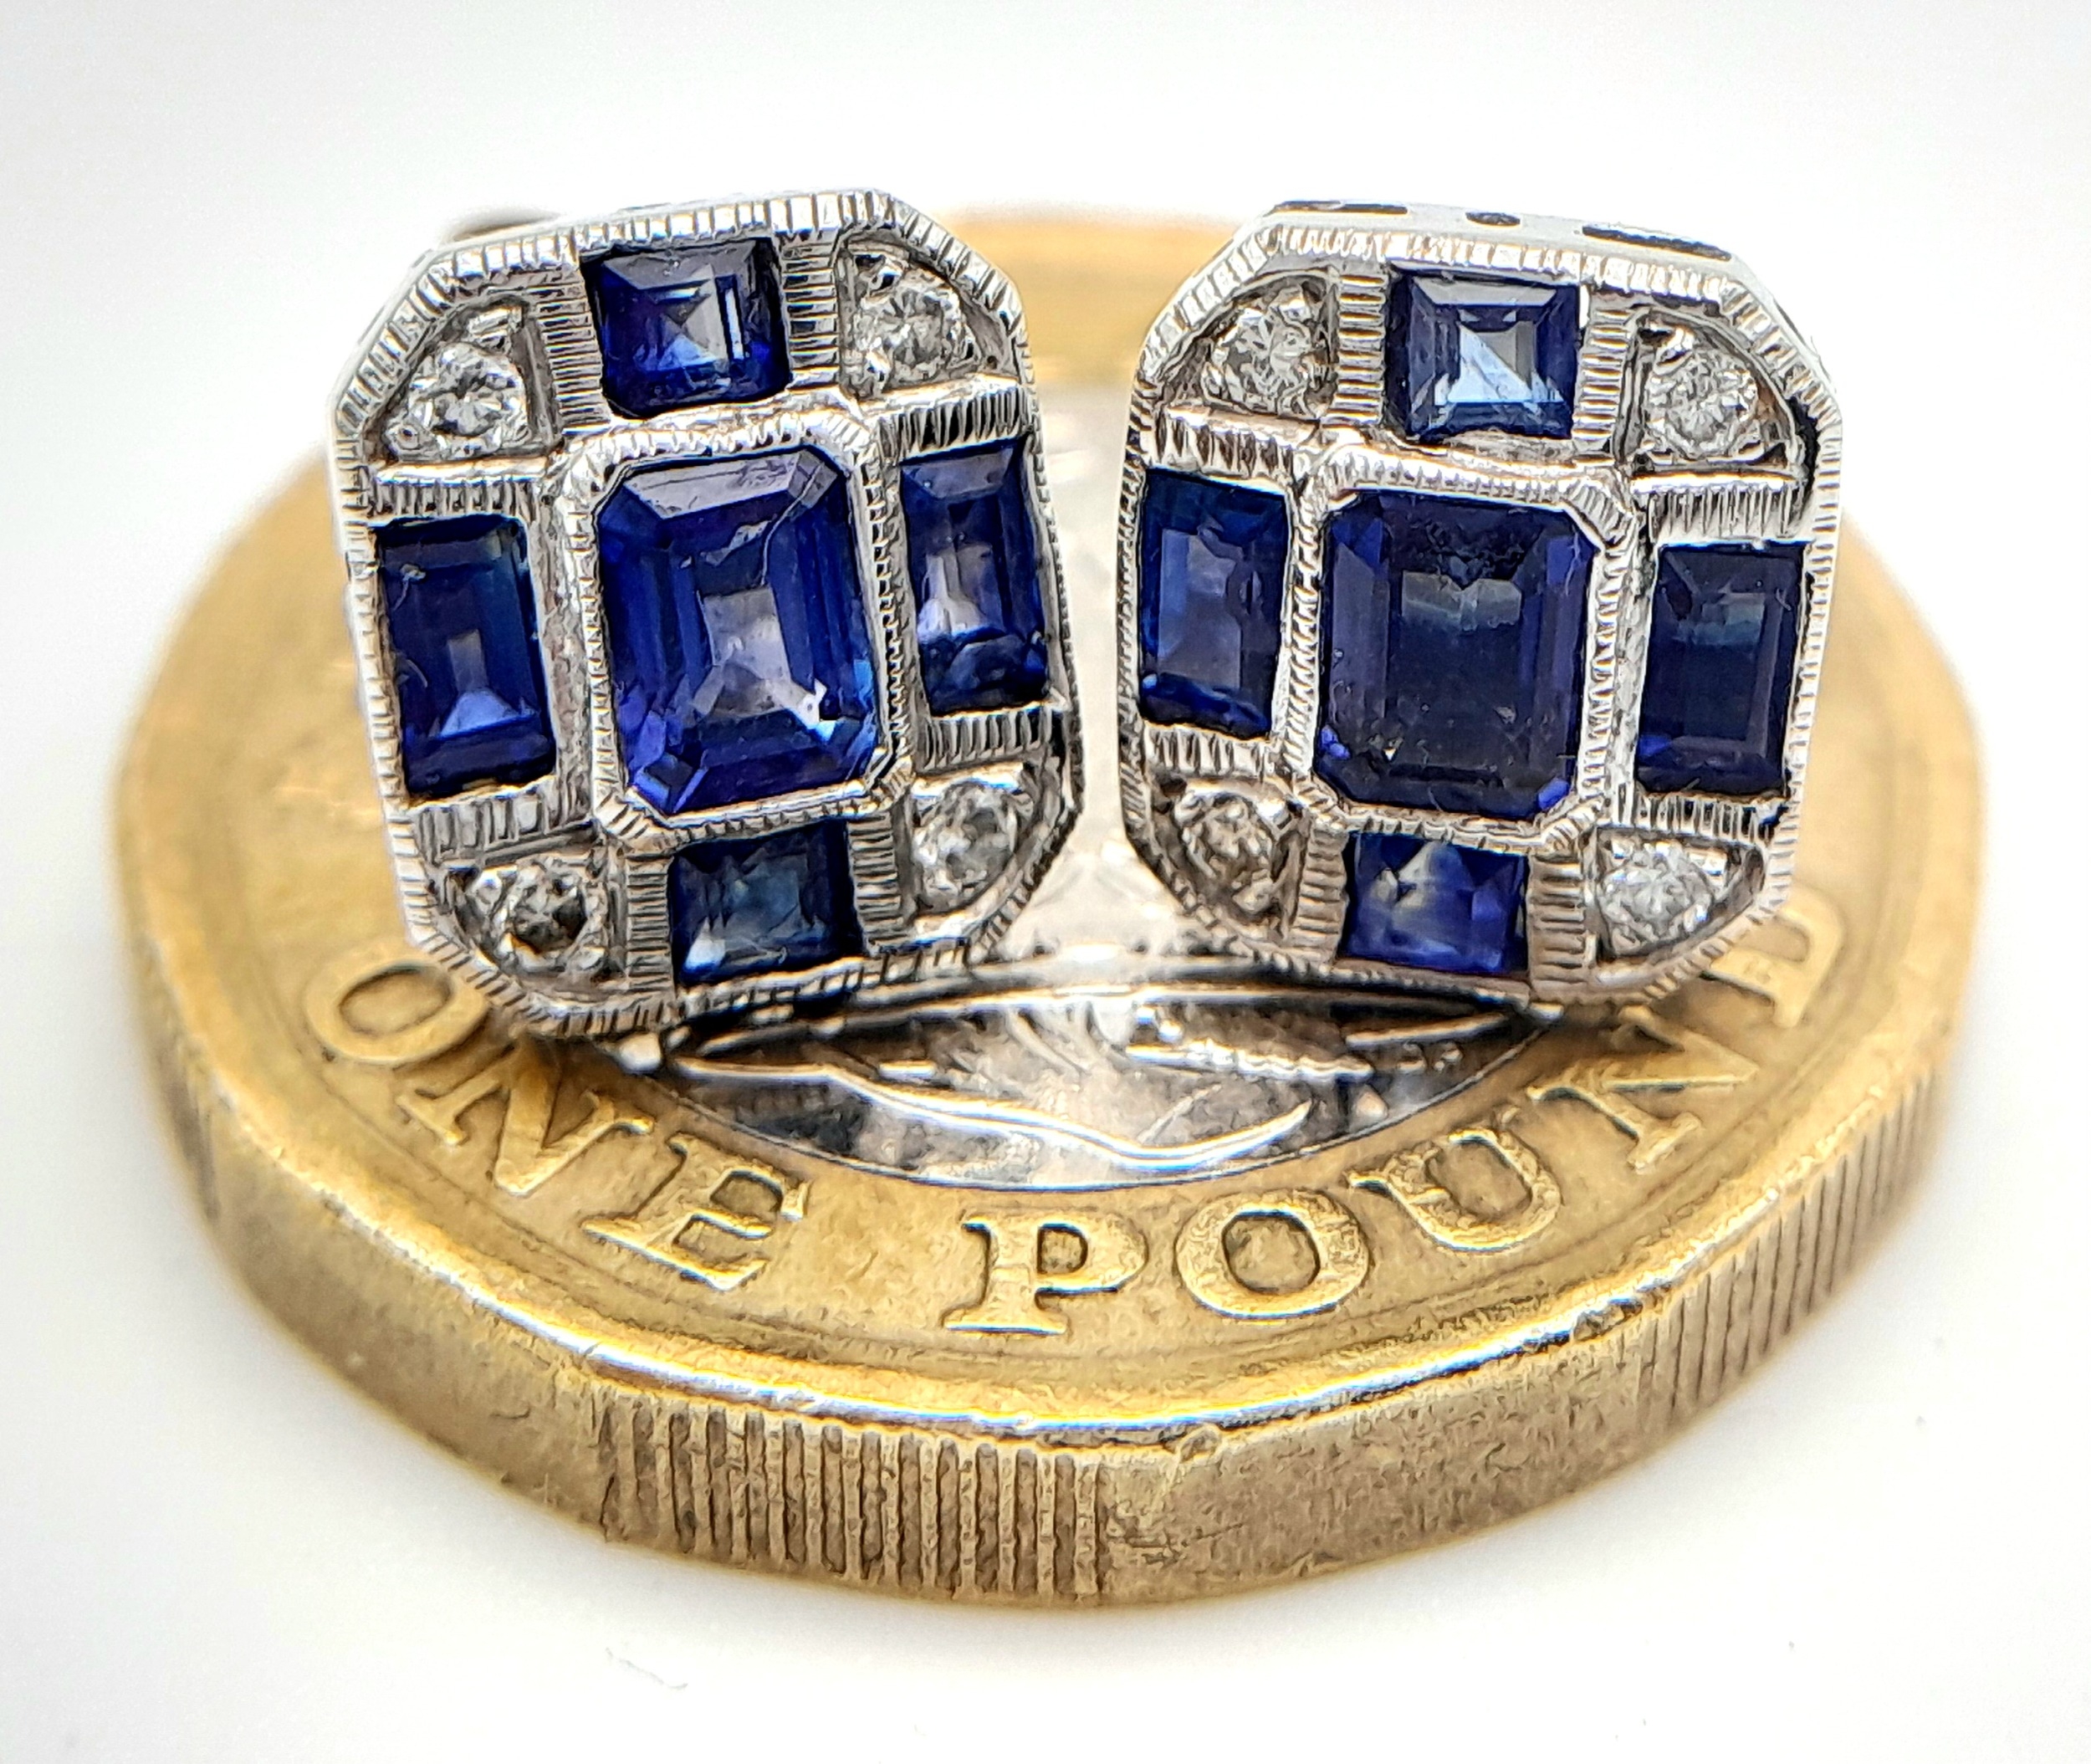 An Exquisite Pair of Vintage 9K White Gold, Diamond and Sapphire Art Deco Design Stud Earrings. - Image 4 of 6